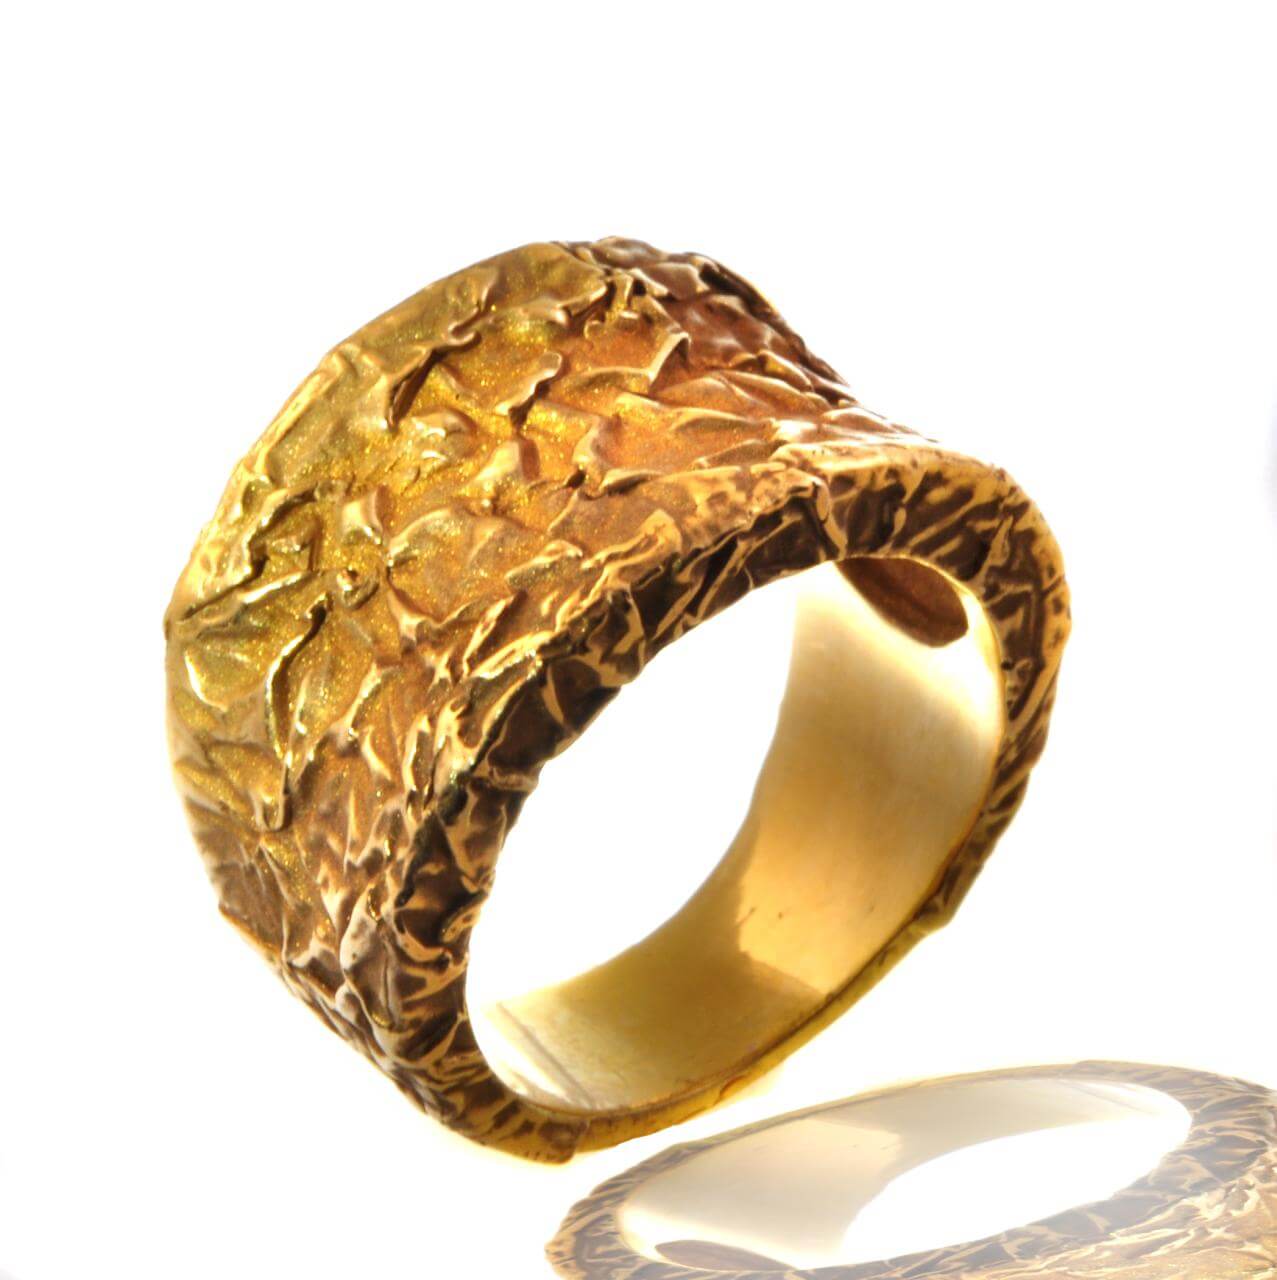 Gold textured ring